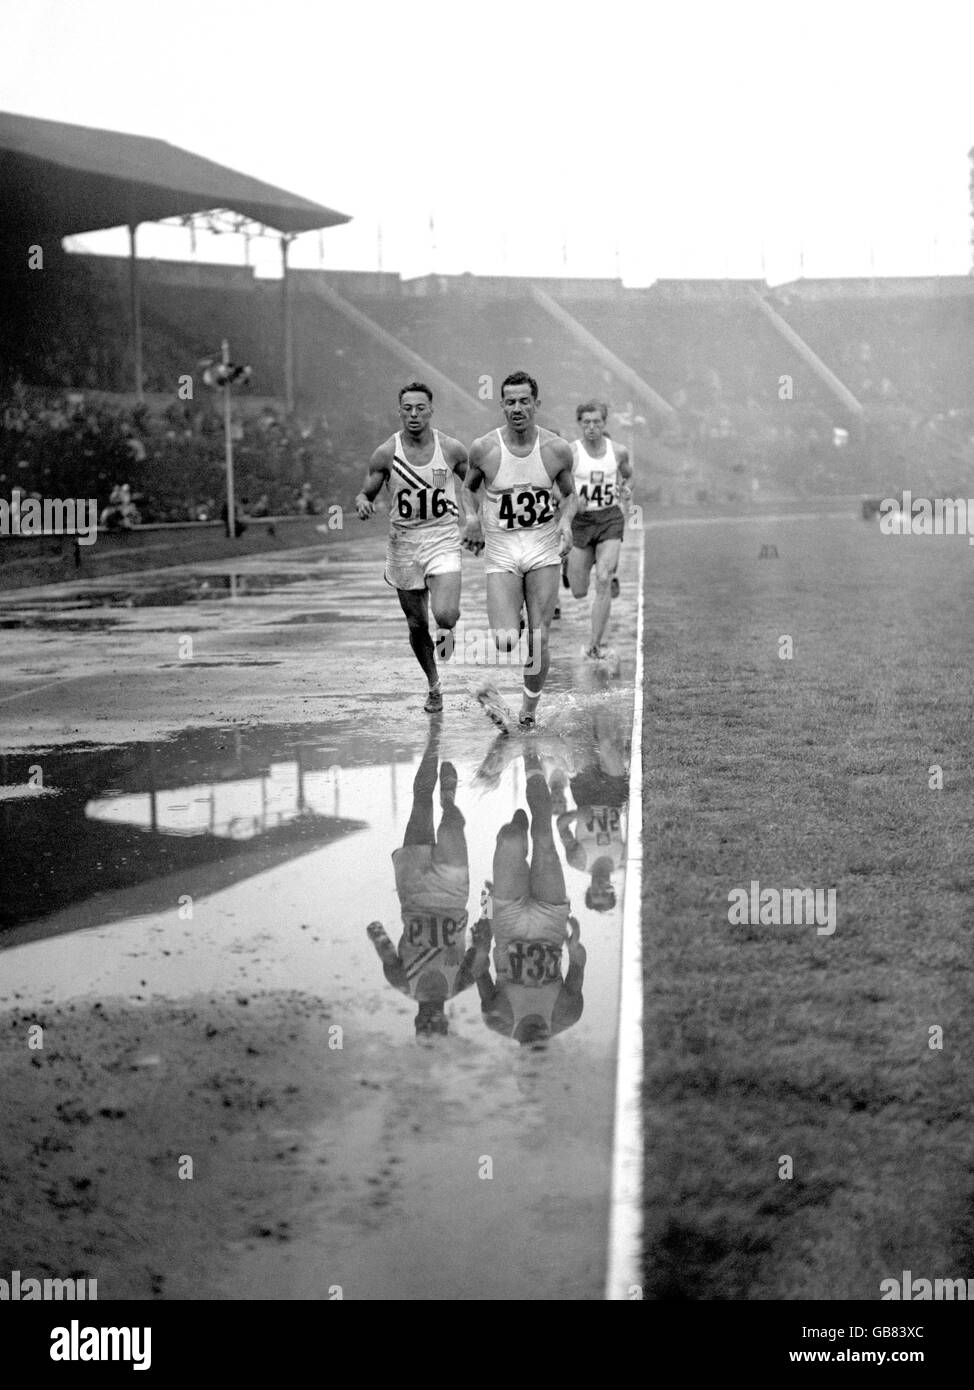 Argentina's Enrique Kistenmacher (432) leads from USA's Irving Mondschein (616) and Poland's Edward Adamczyk (445) as they splash around the track in the 1500m discipline Stock Photo